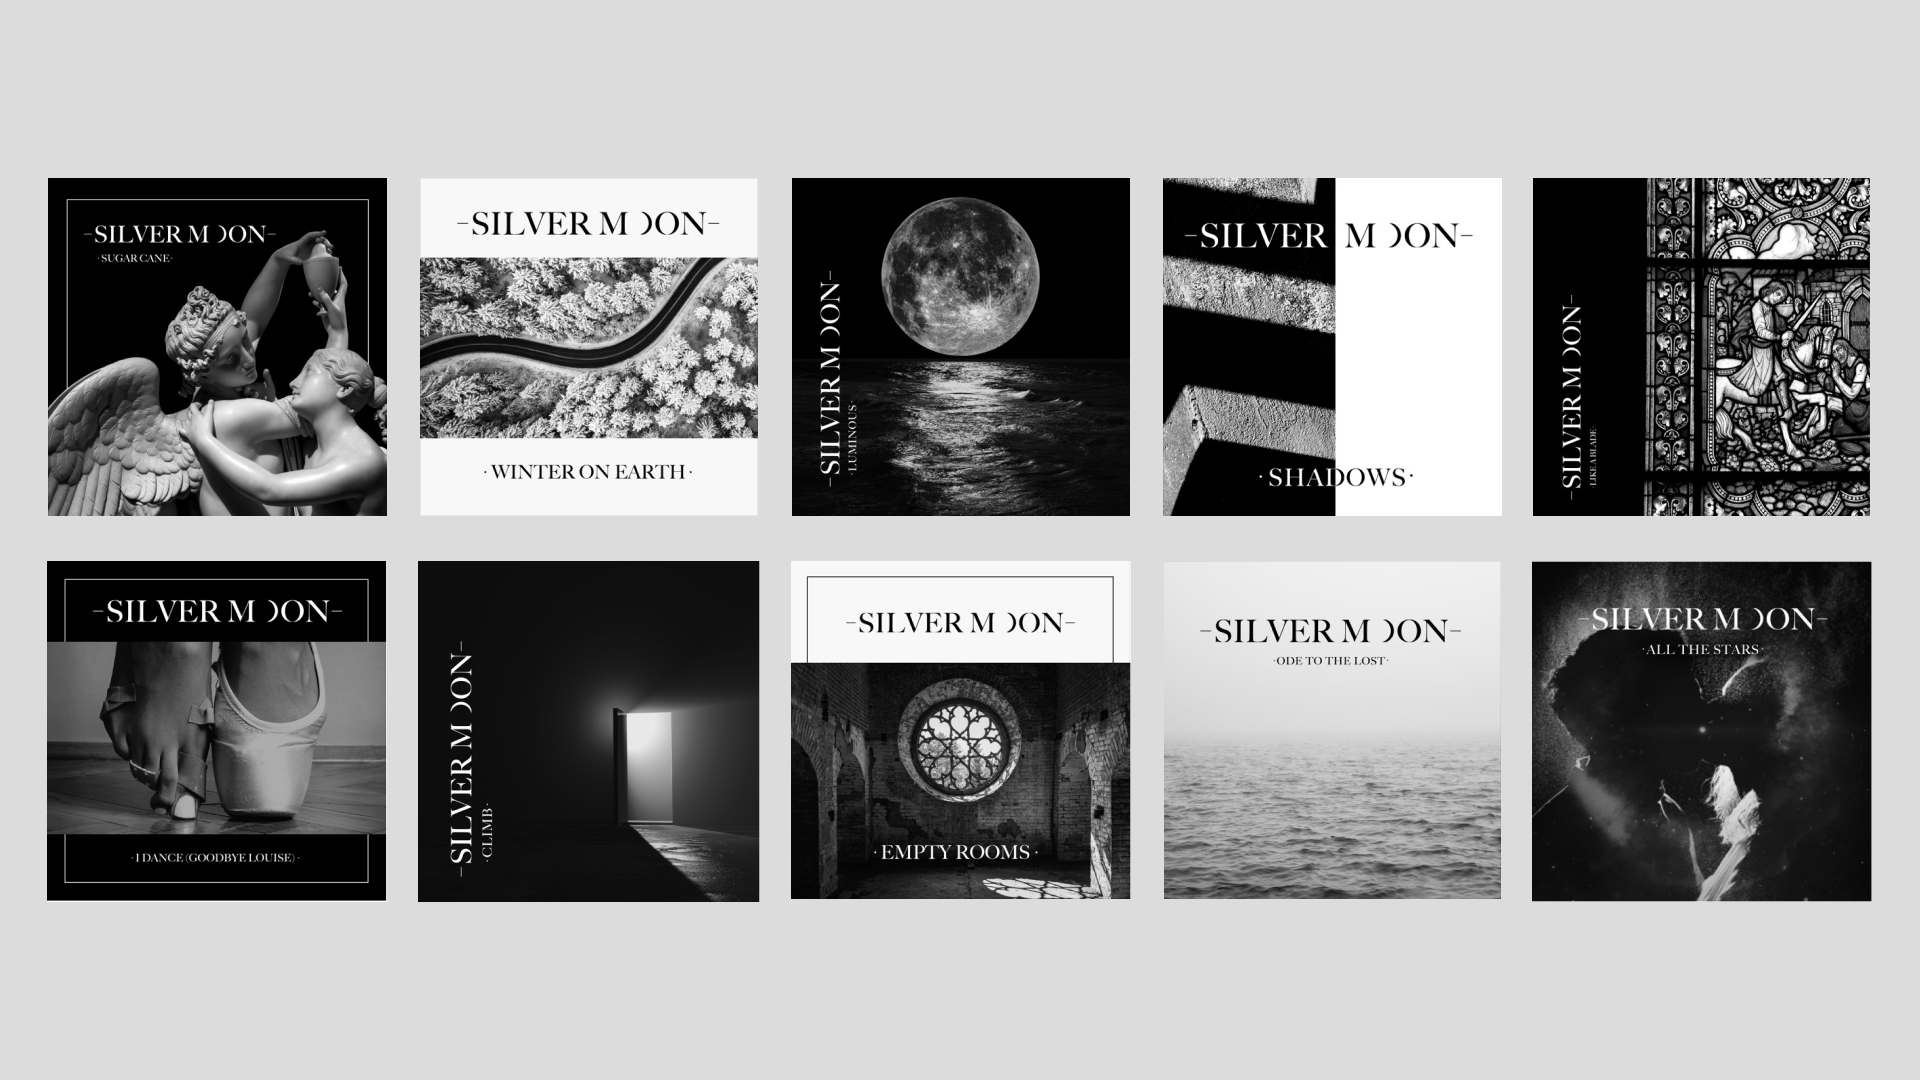 Gallery of Cover Art